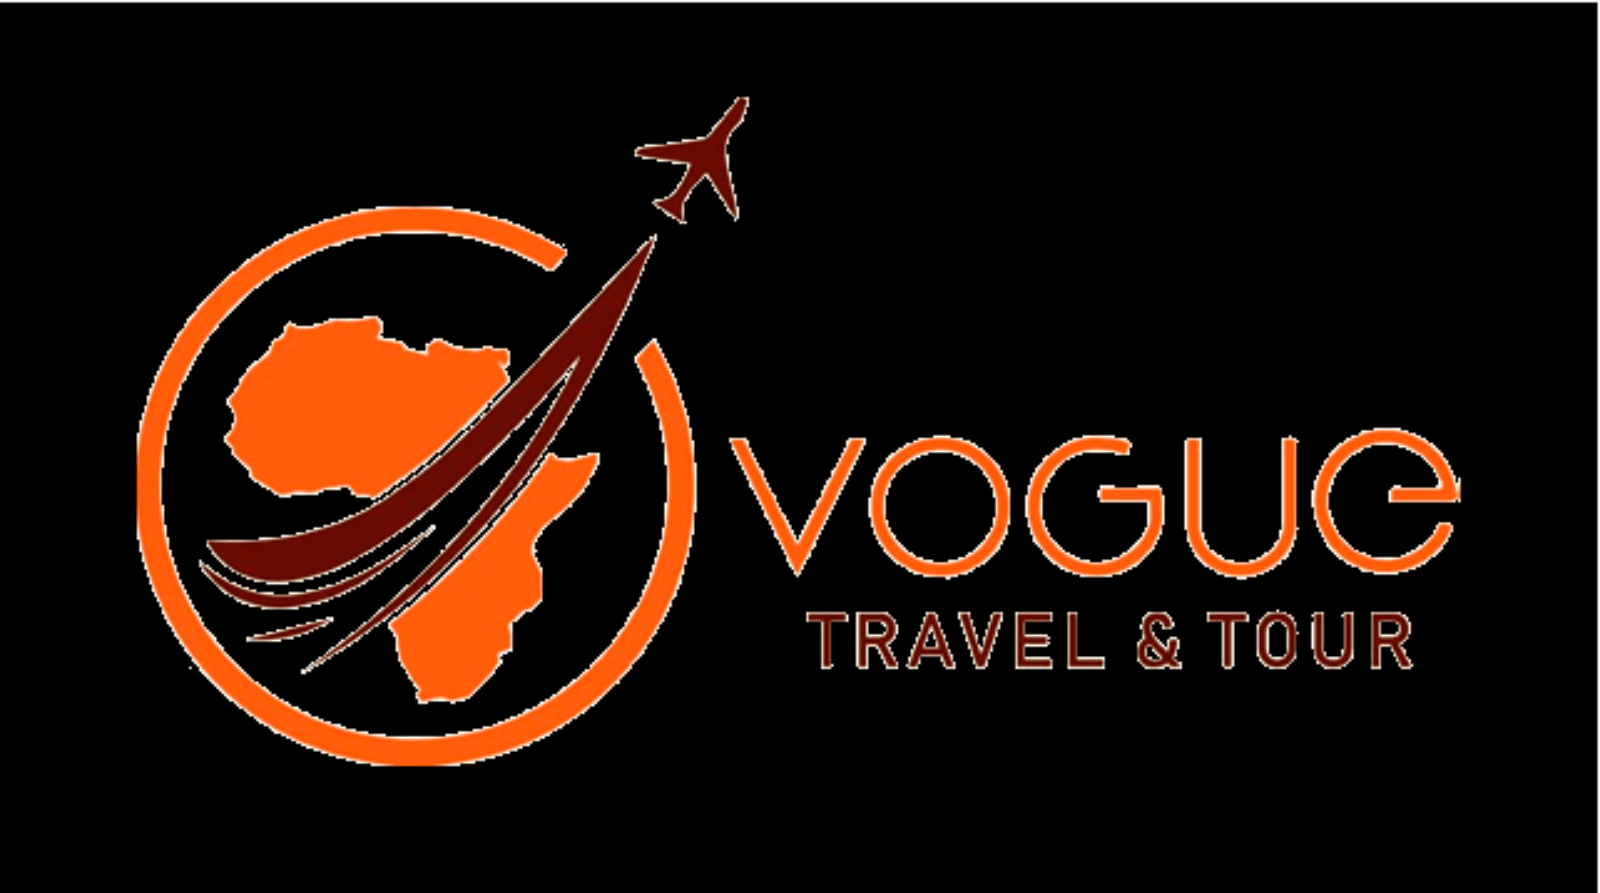 Logo of vogue travel & tour featuring an airplane and stylized representation of the african continent.